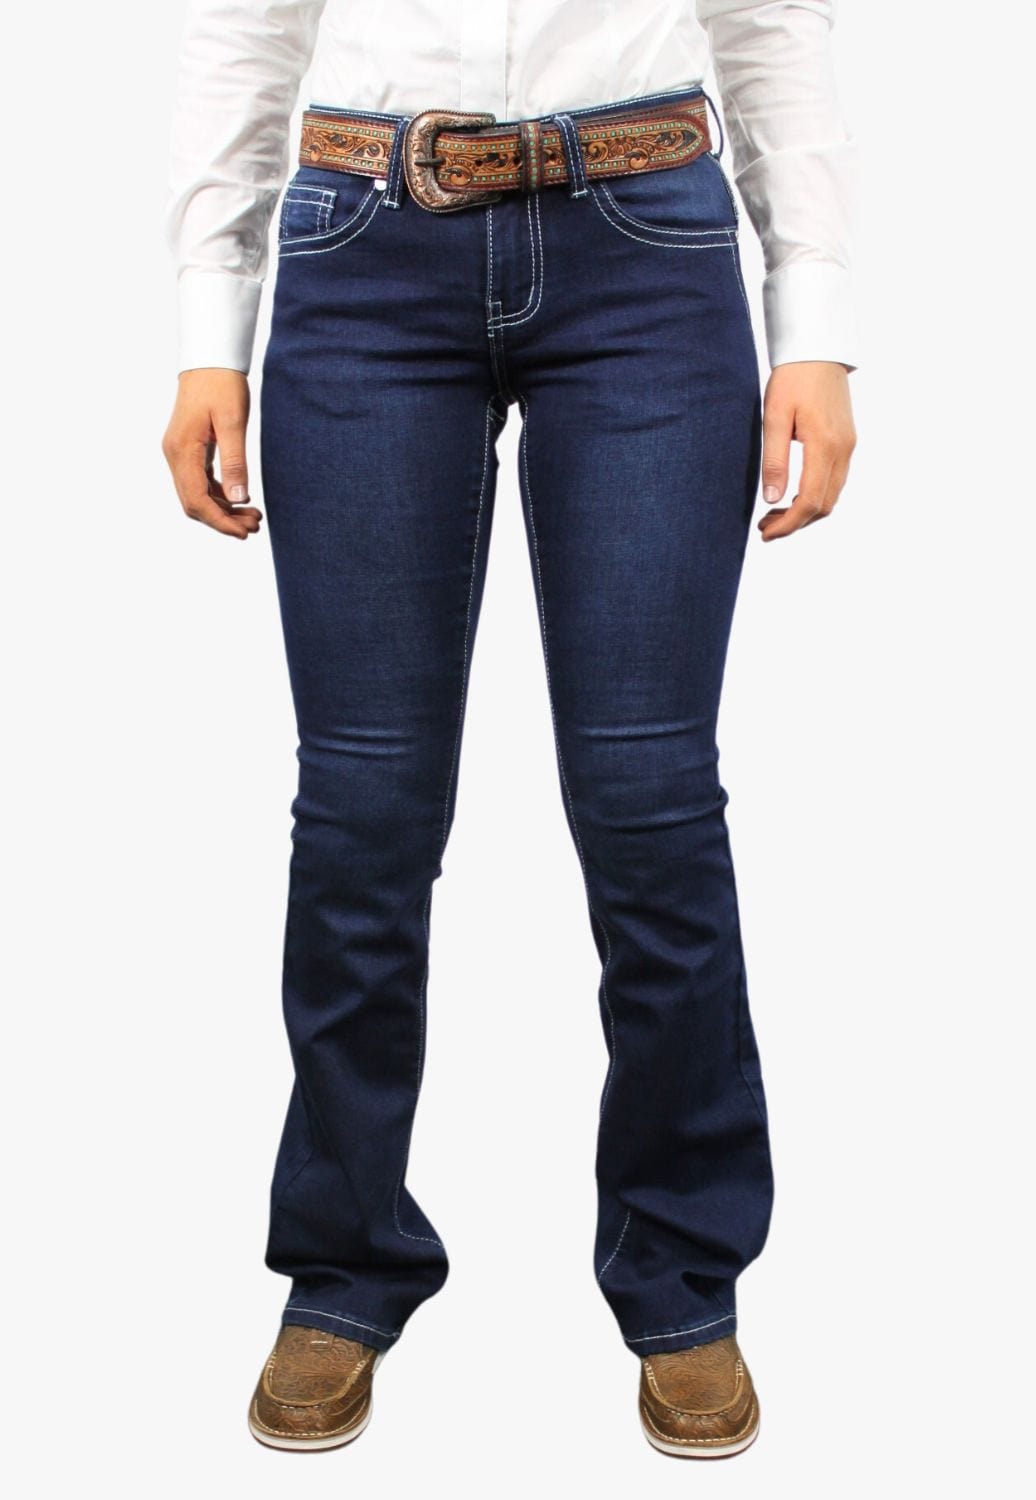 Outback CLOTHING-Womens Jeans Outback Womens Alamosa Bling Jean